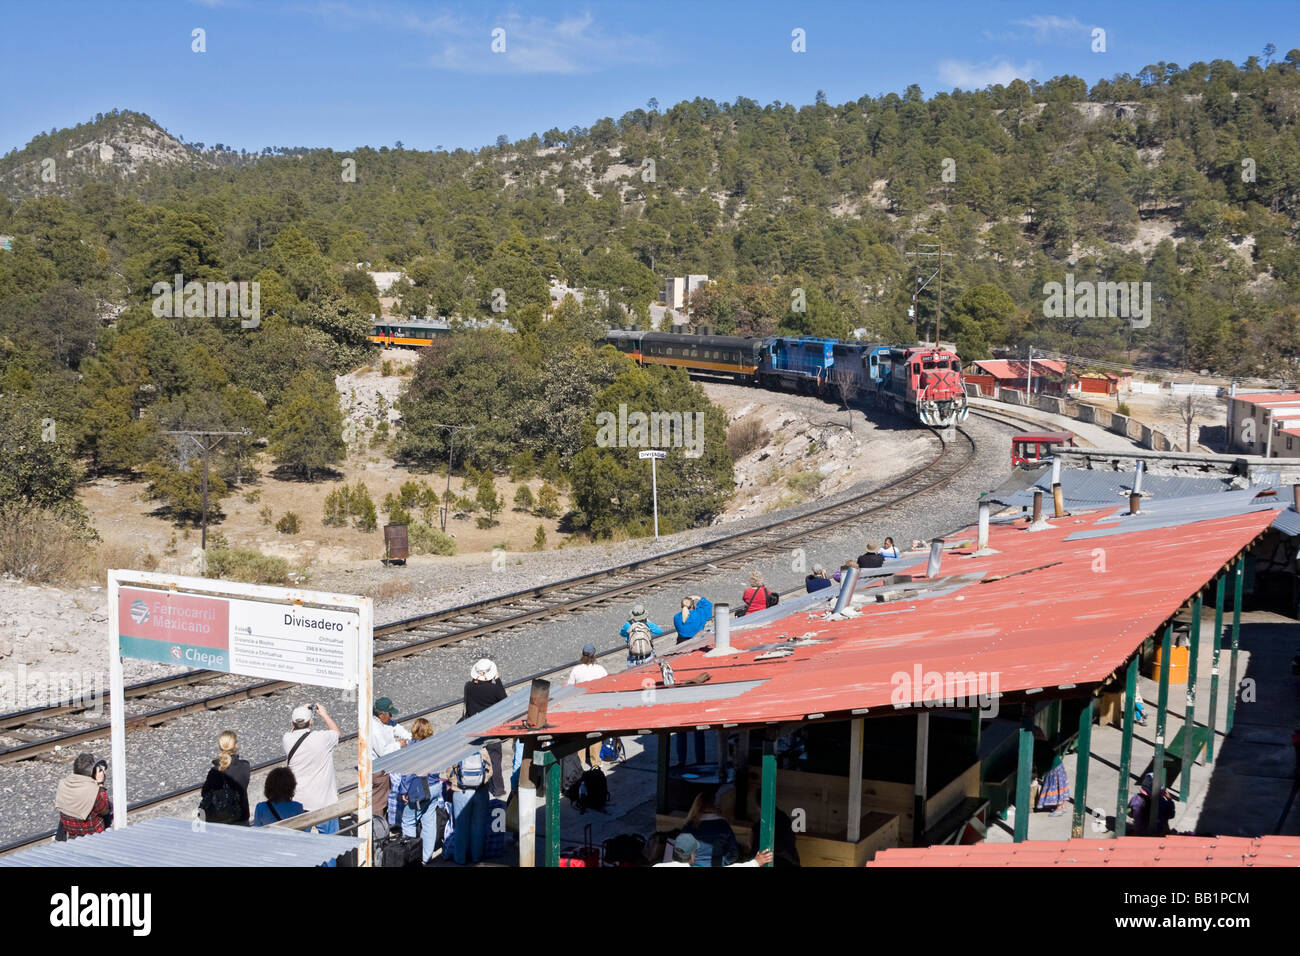 Copper Canyon, El Chepe, train arrives at Divisadero station along the Copper Canyon route in Mexico. Stock Photo